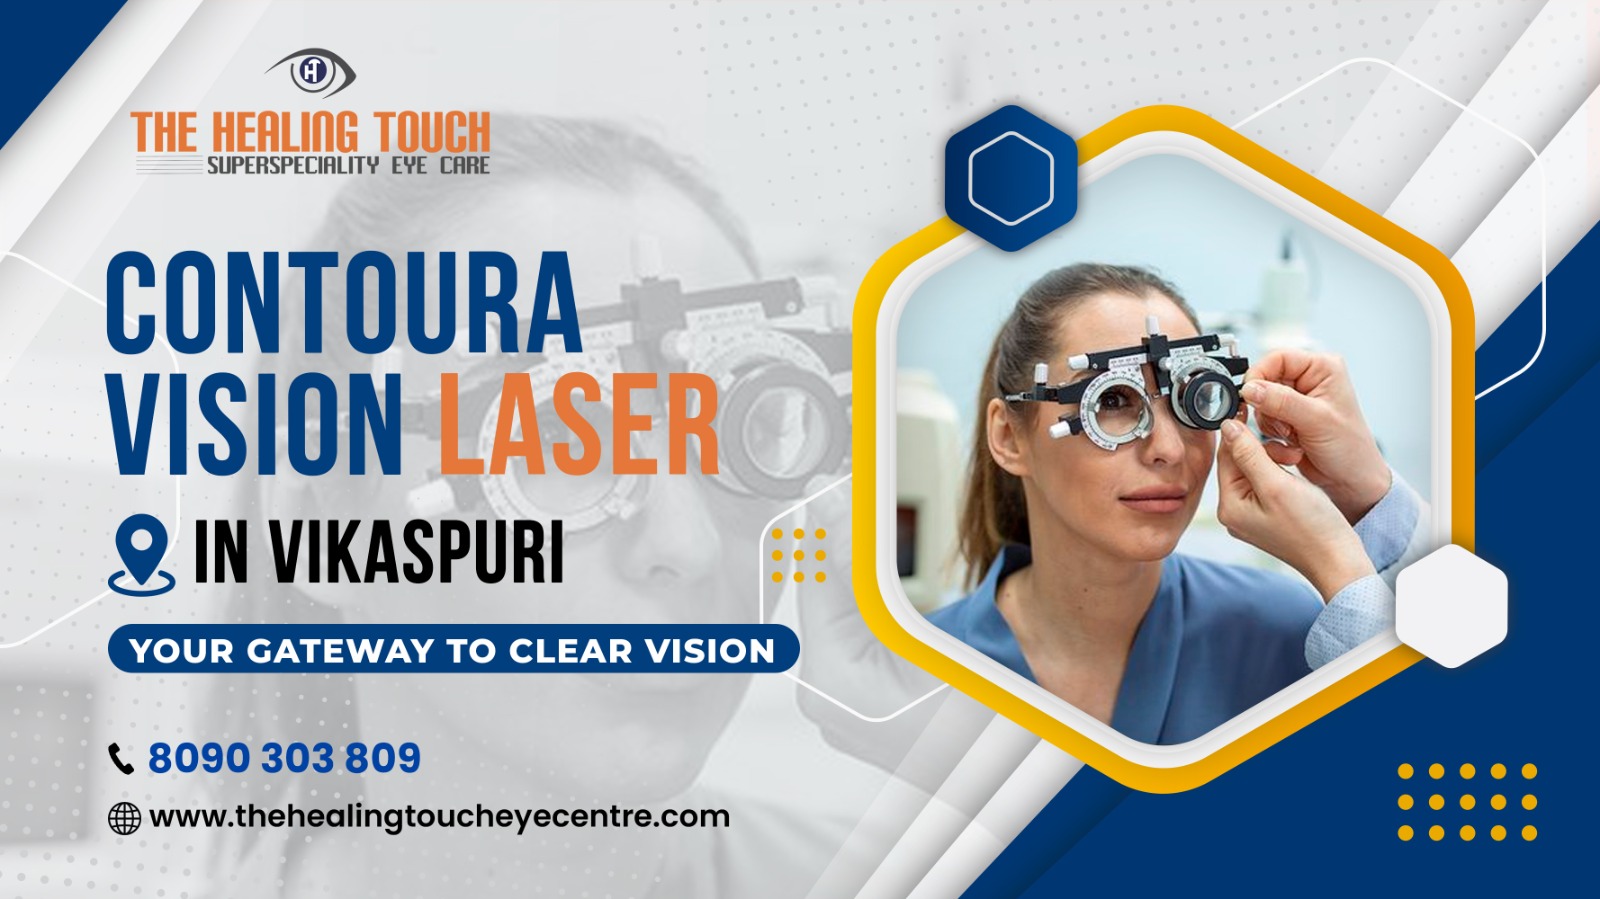 Contoura Vision Laser in Vikaspuri: Your Gateway to Clear Vision